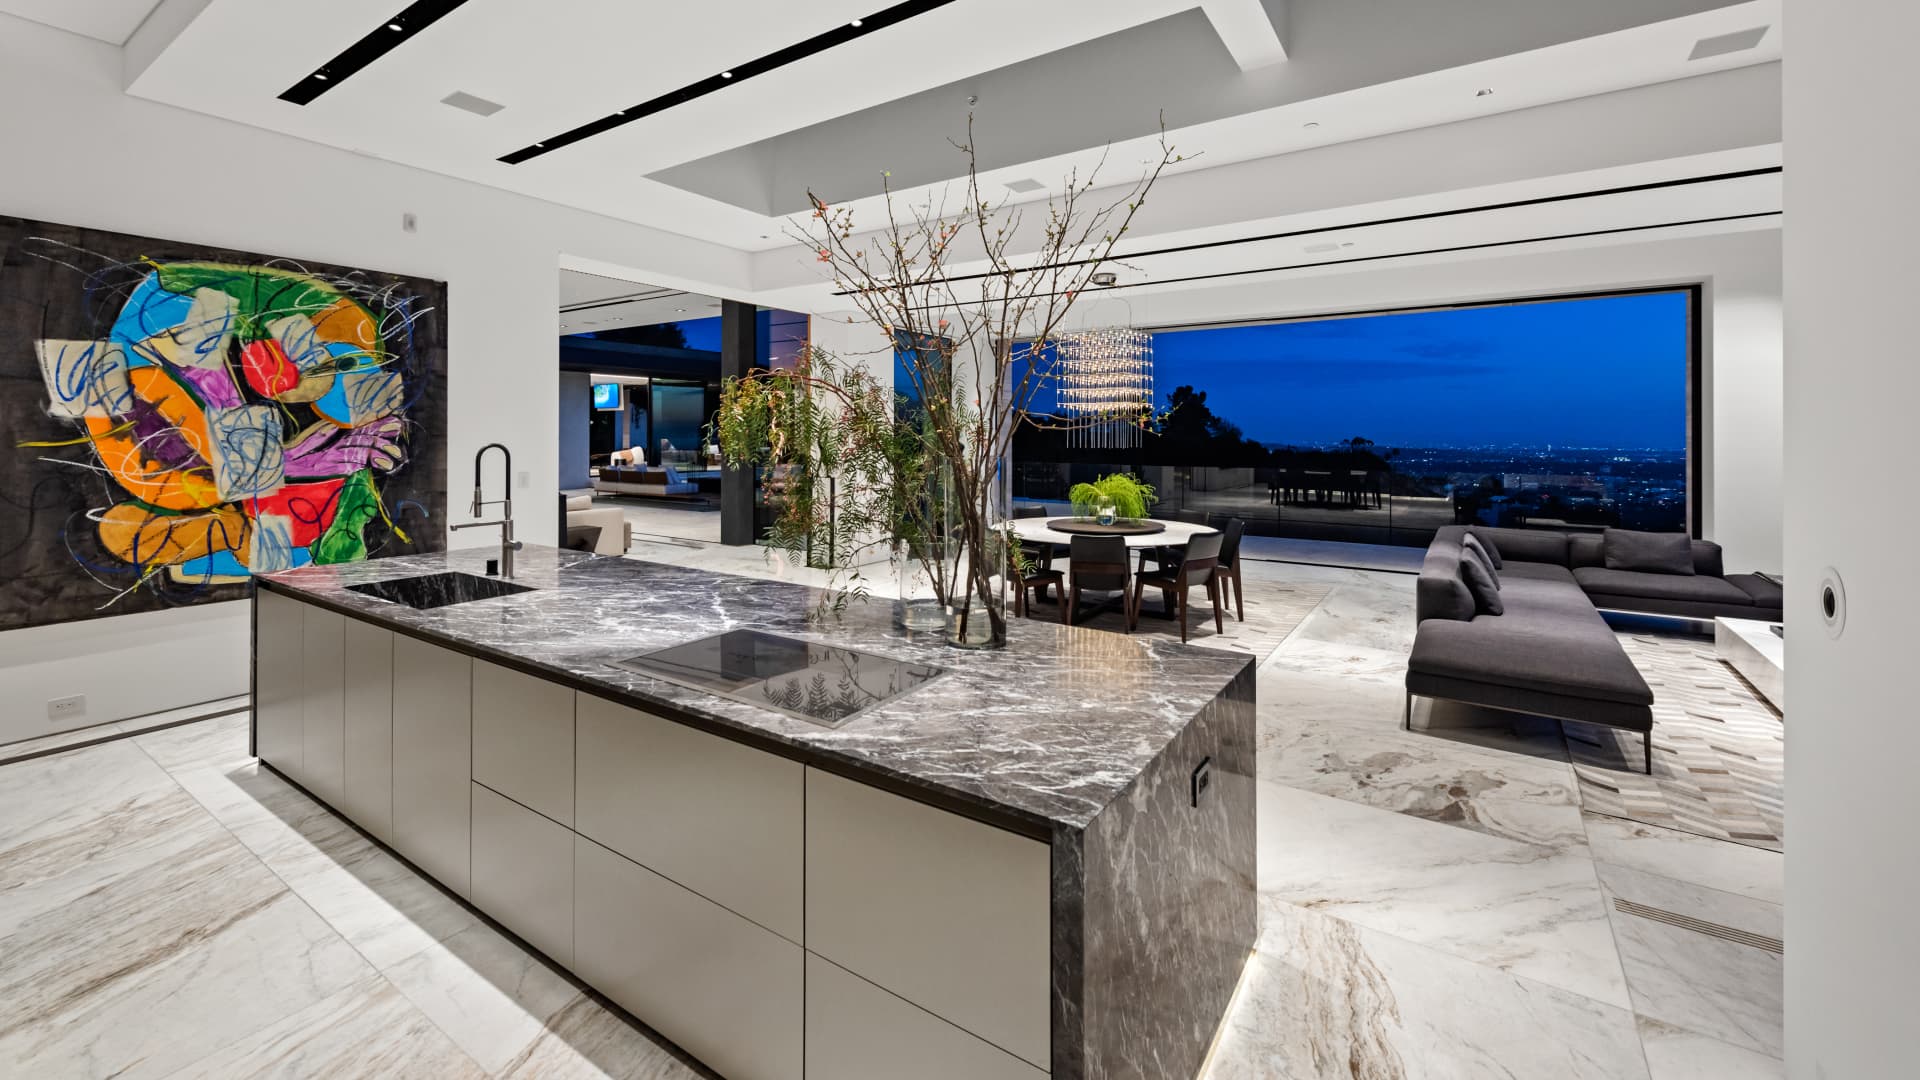 The home's main kitchen includes a 16-foot island wrapped in leathered marble.